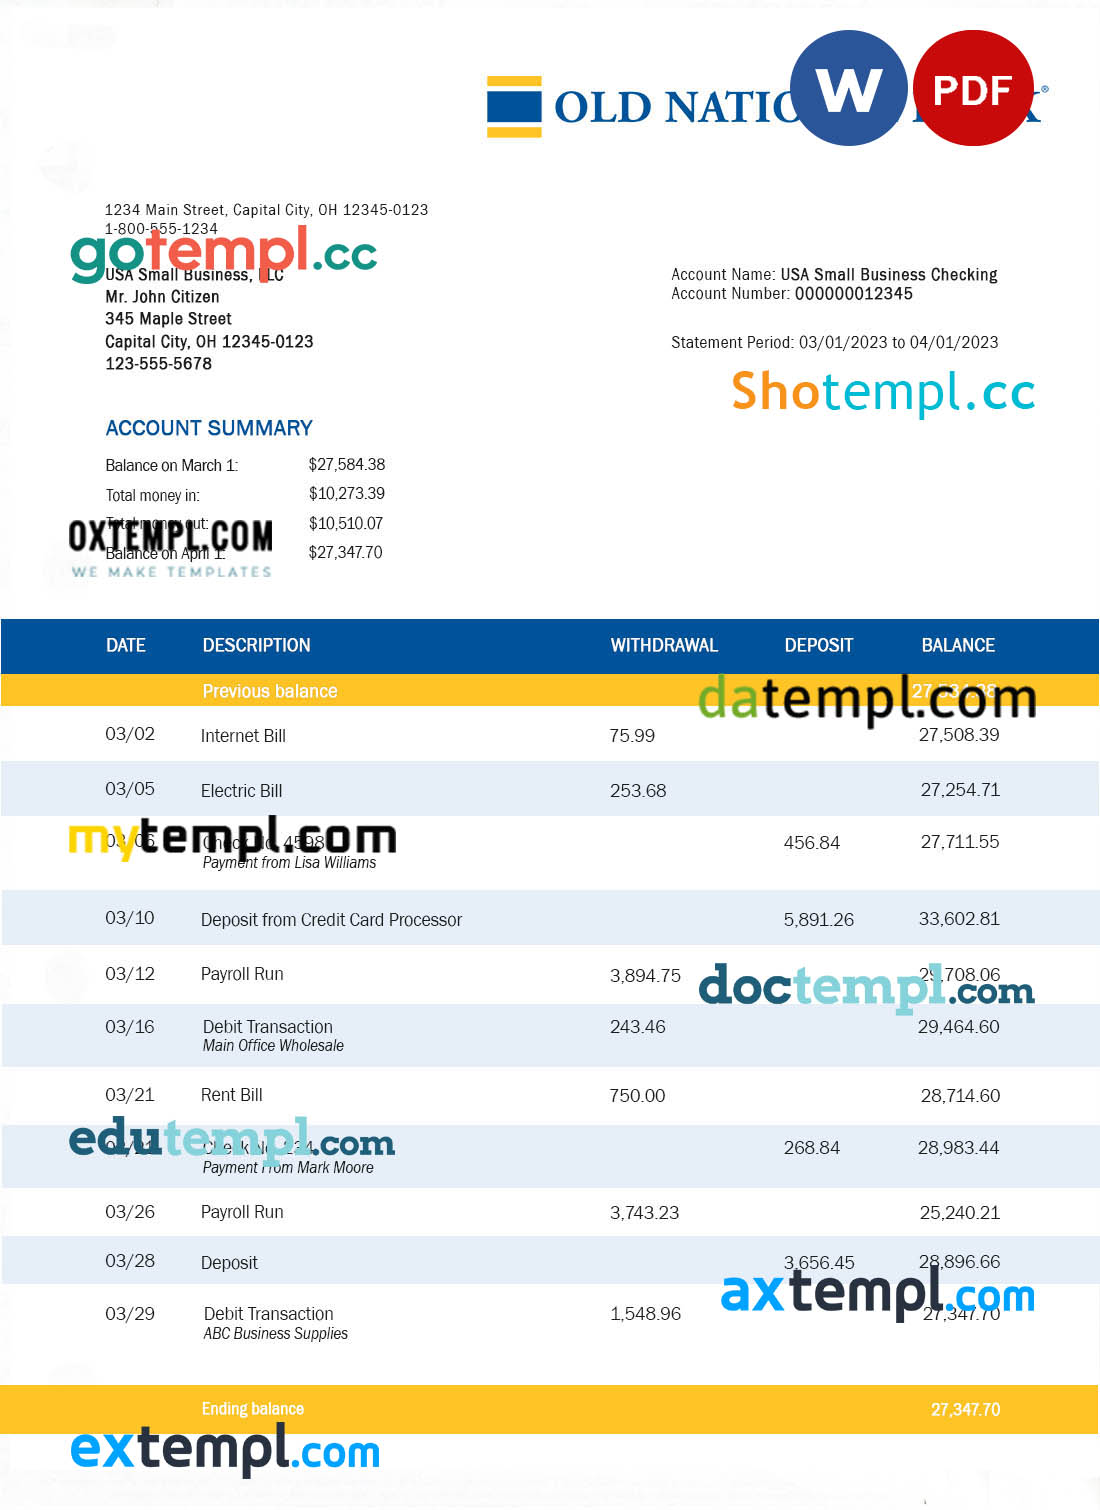 editable template, OLD National Bank organization account statement Word and PDF template